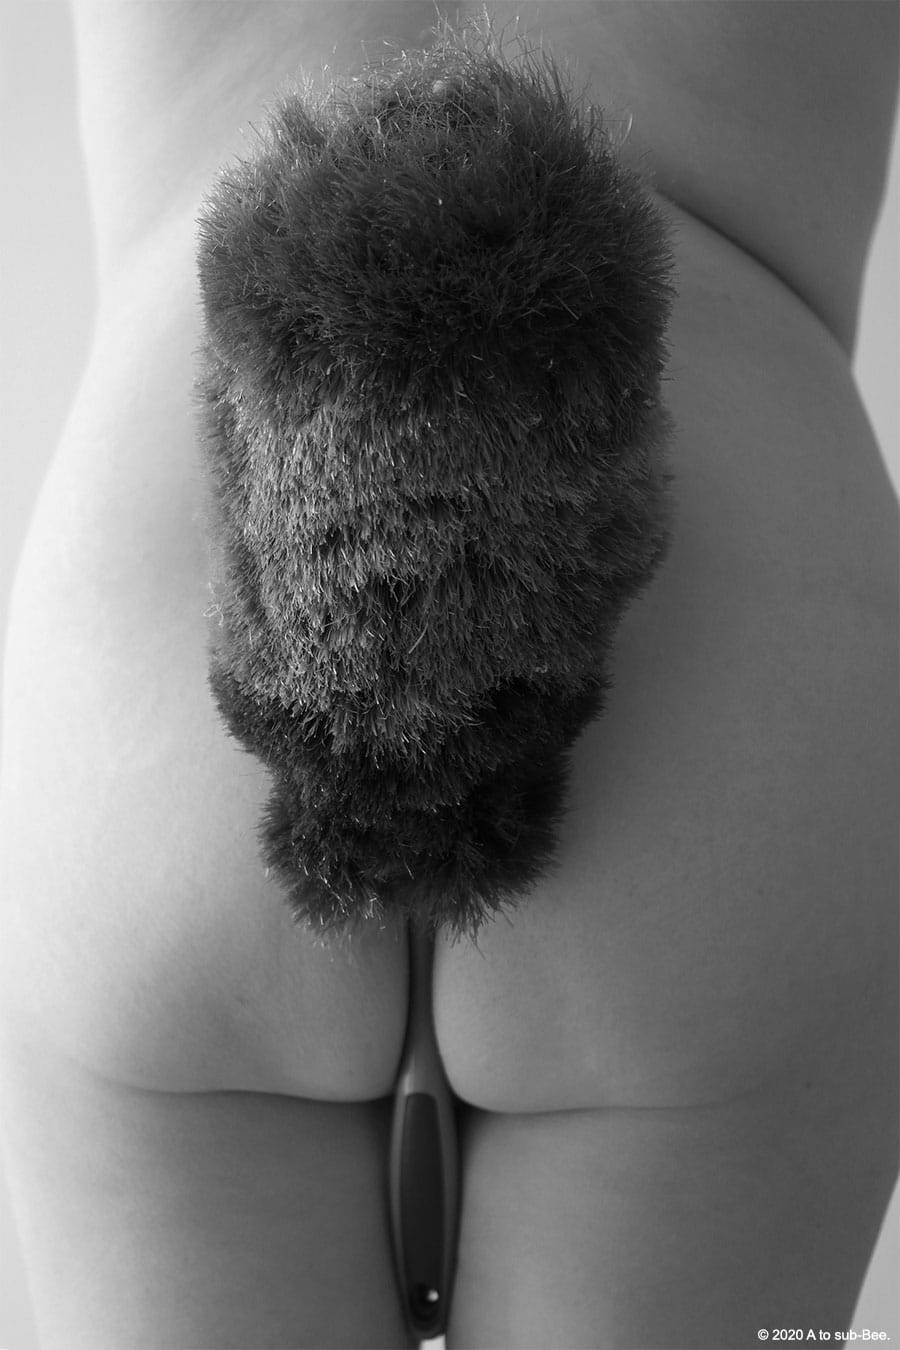 A feather duster gripped between Bee's bum cheeks